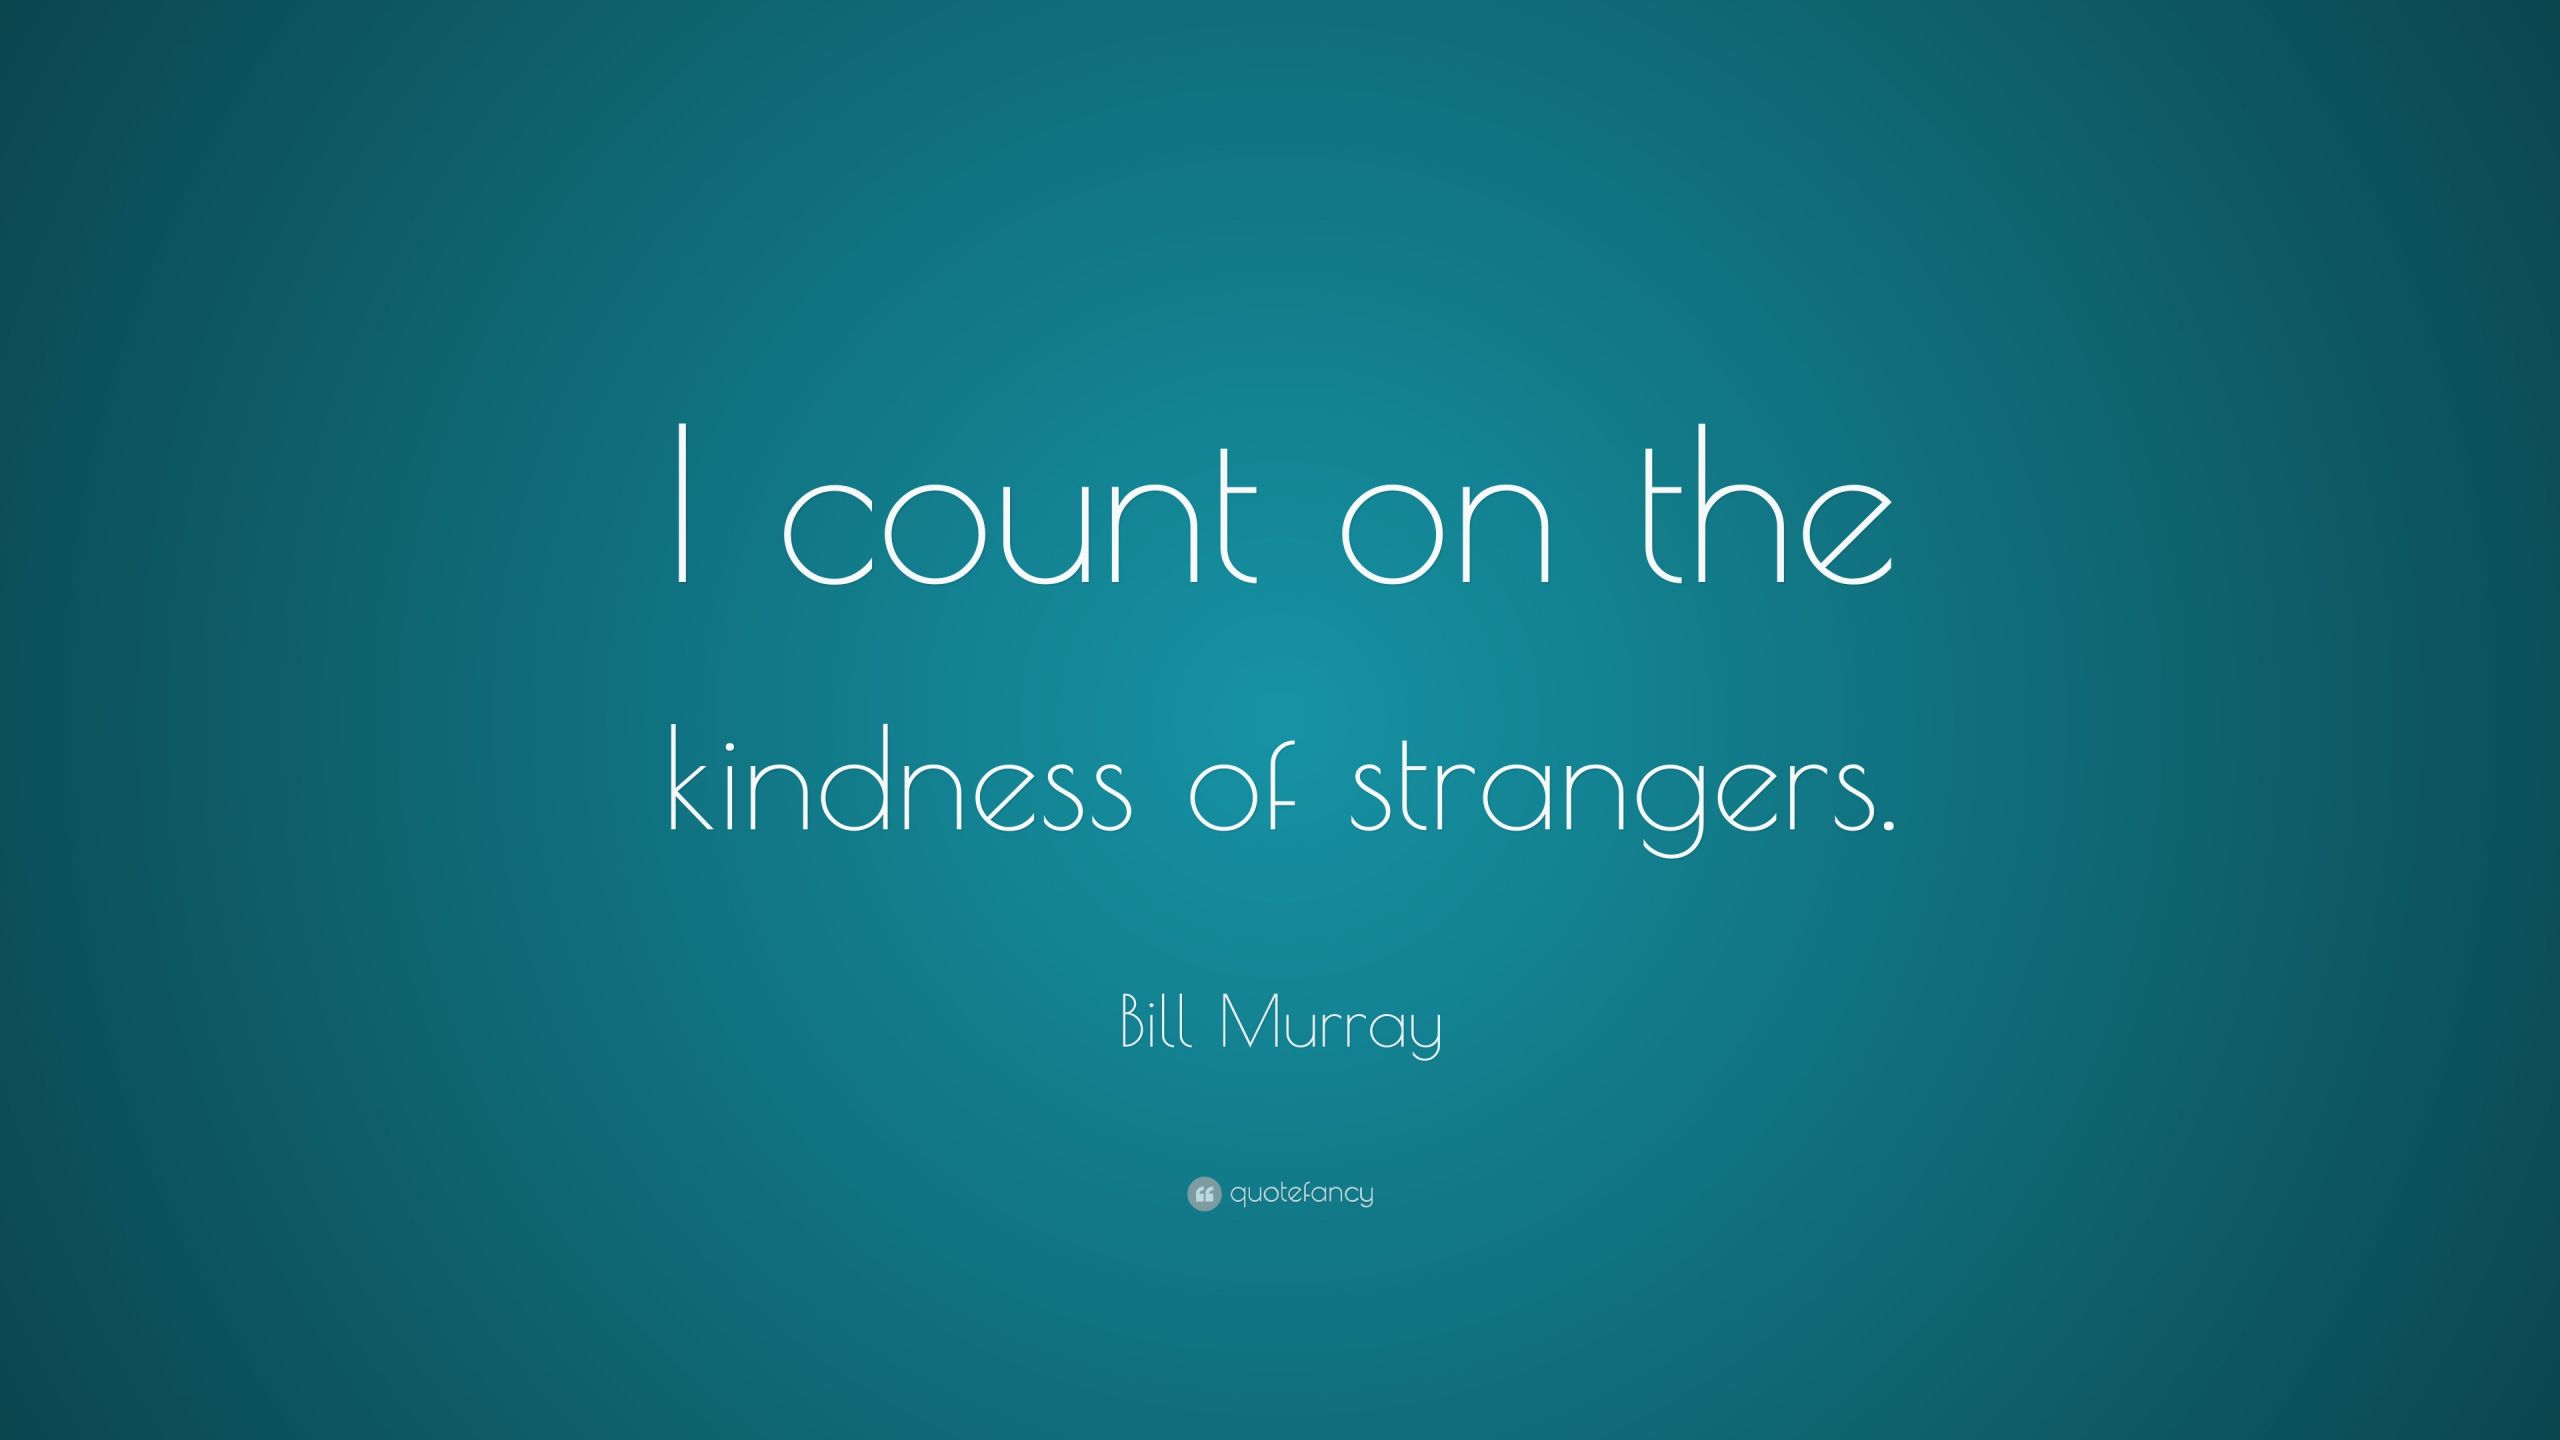 The Kindness Of Strangers Quote
 Bill Murray Quotes 100 wallpapers Quotefancy